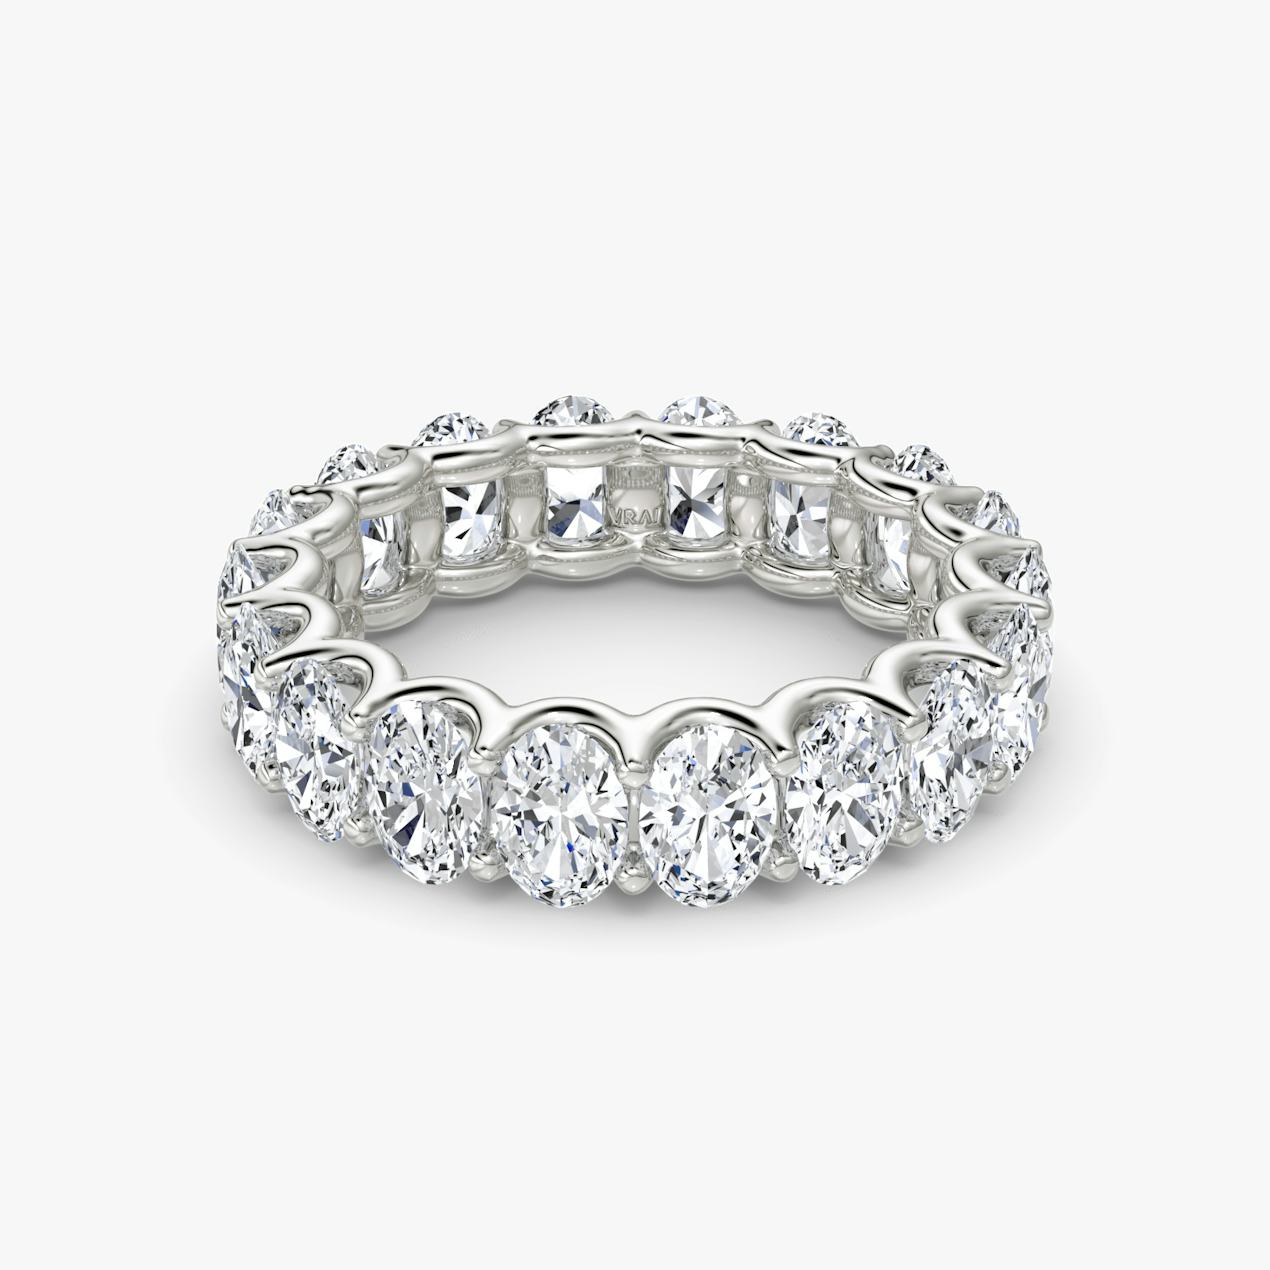 Oval white gold eternity band